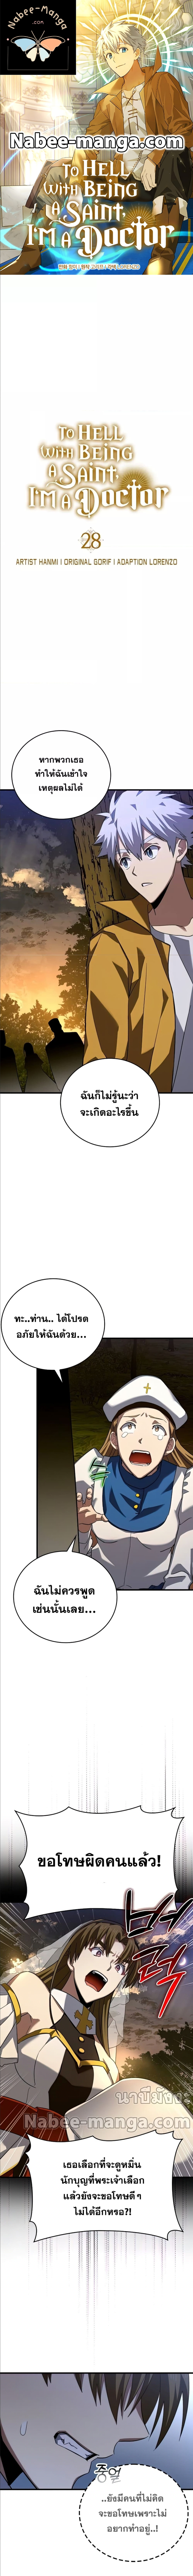 To Hell With Being A Saint, Iโ€m A Doctor เธ•เธญเธเธ—เธตเน28 (1)